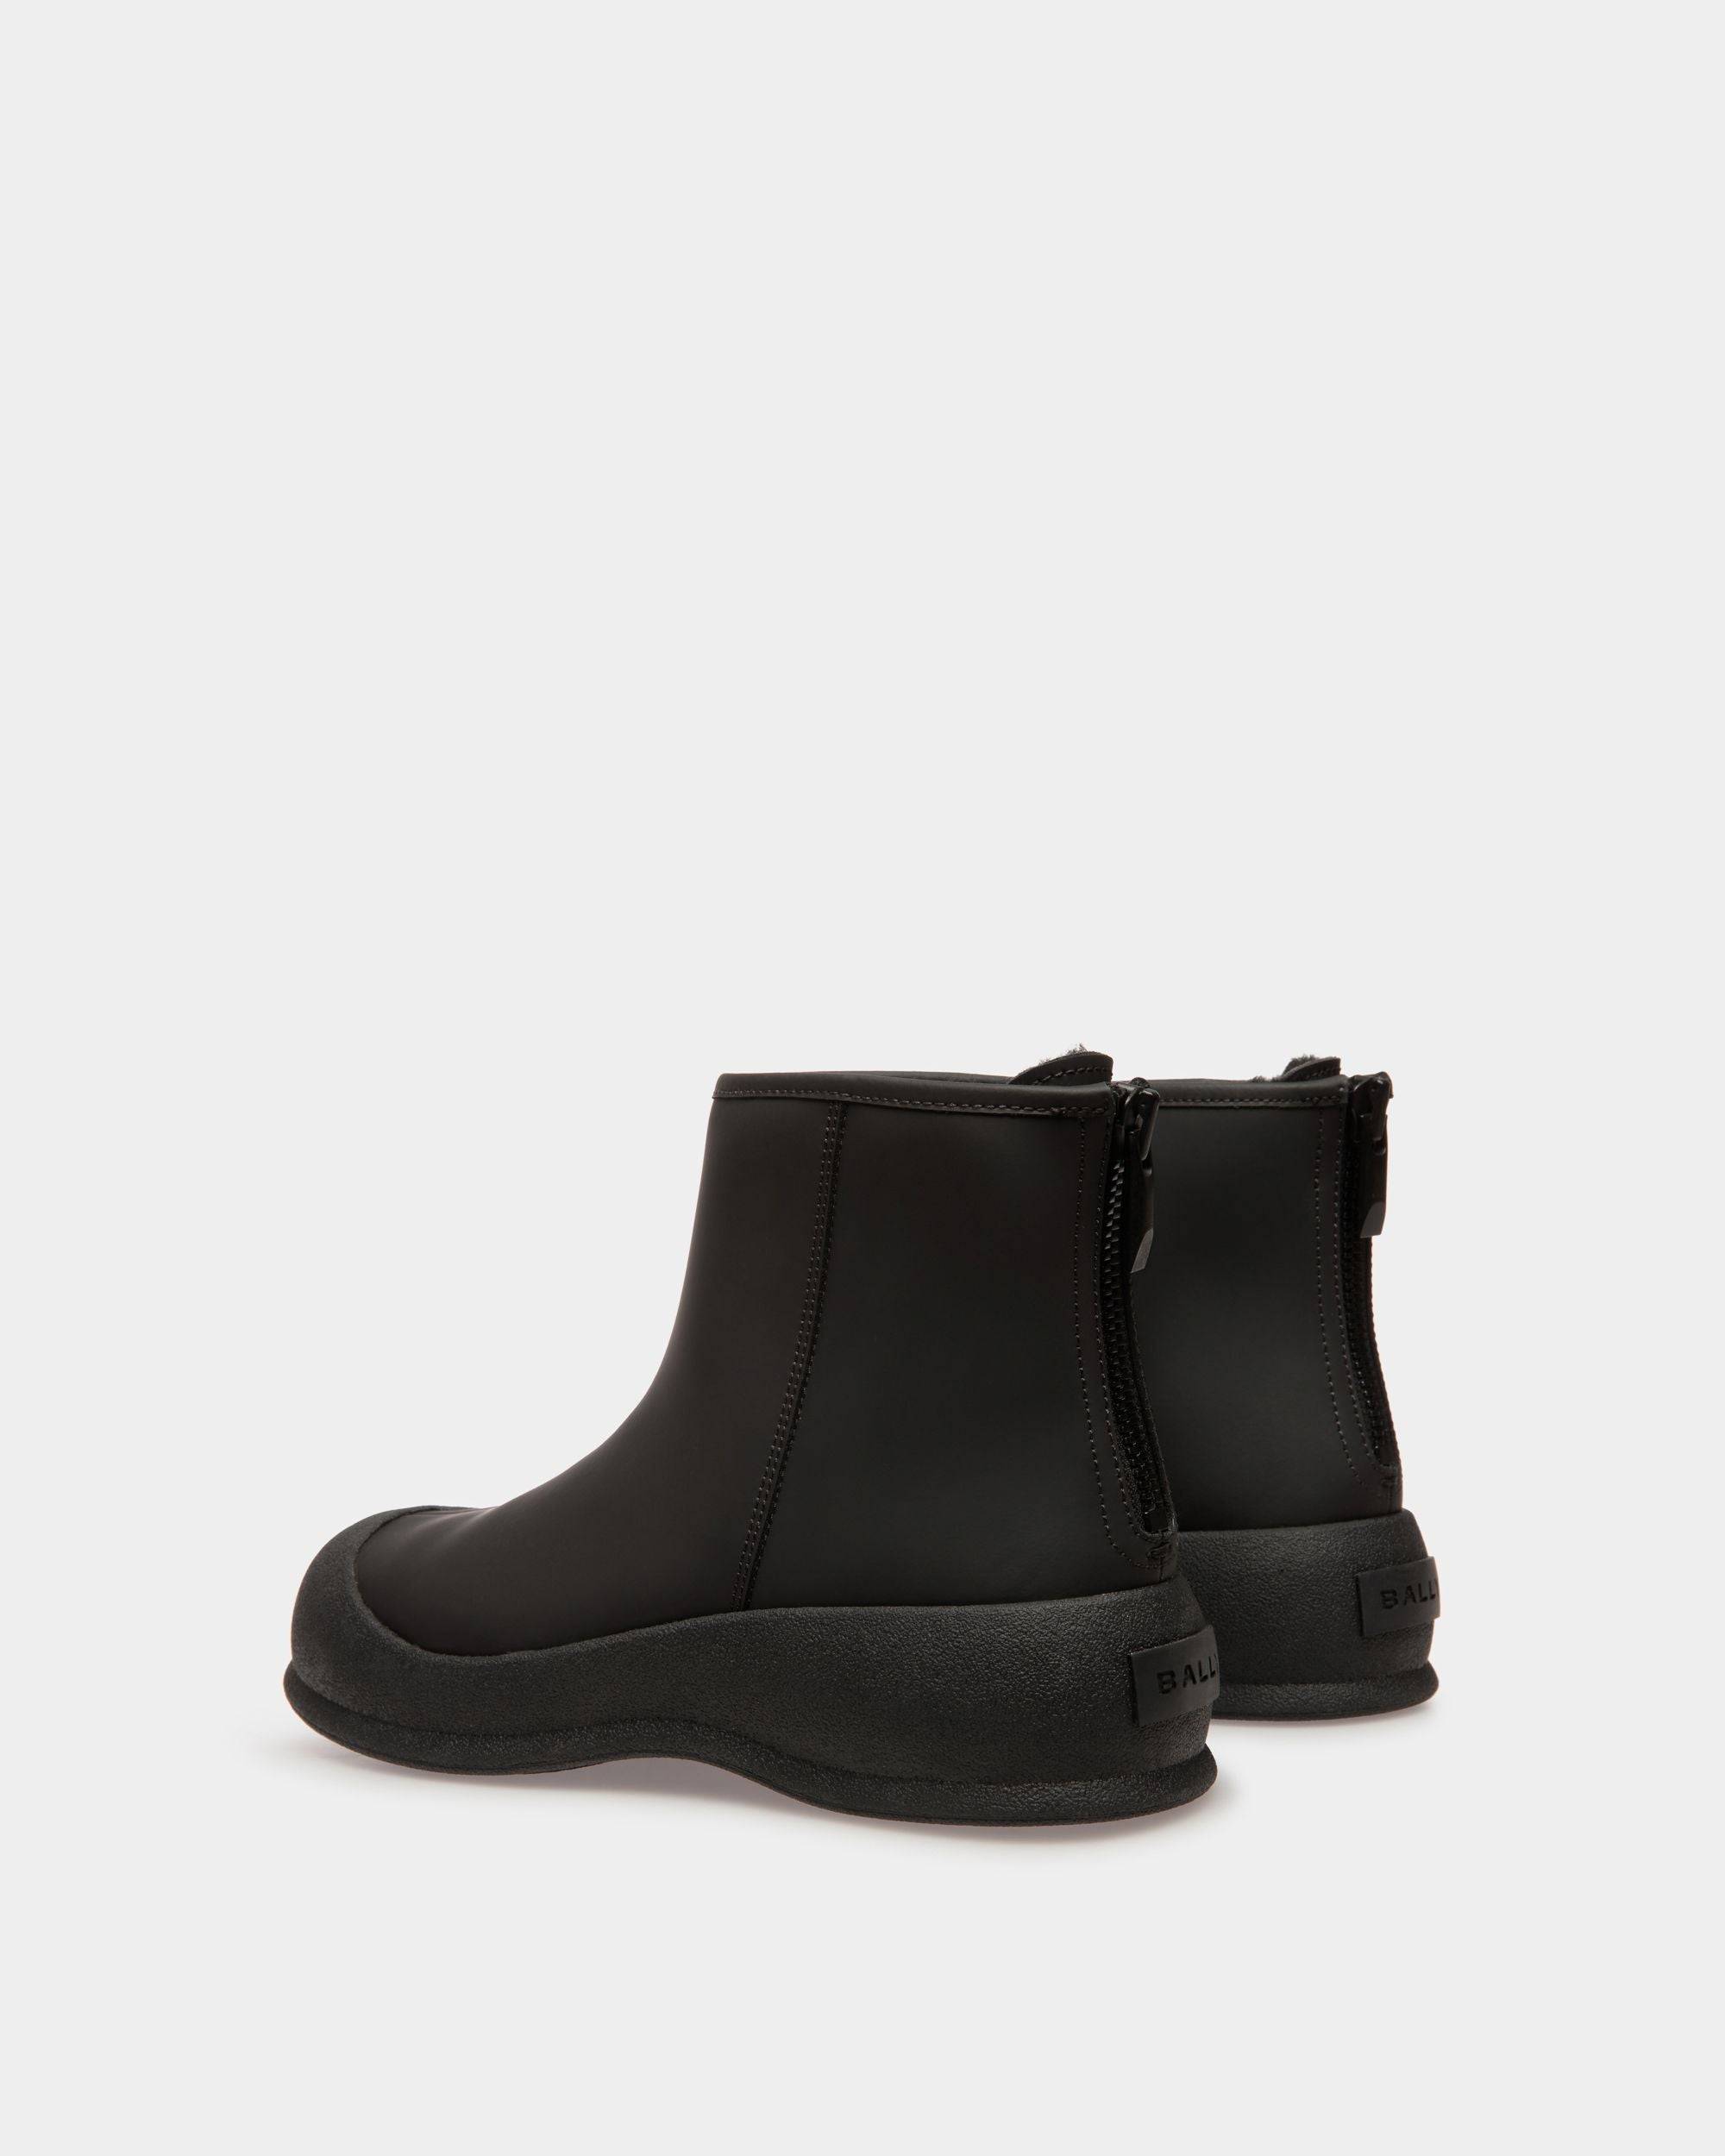 Carsey | Women's Boots | Black Leather | Bally | Still Life 3/4 Back